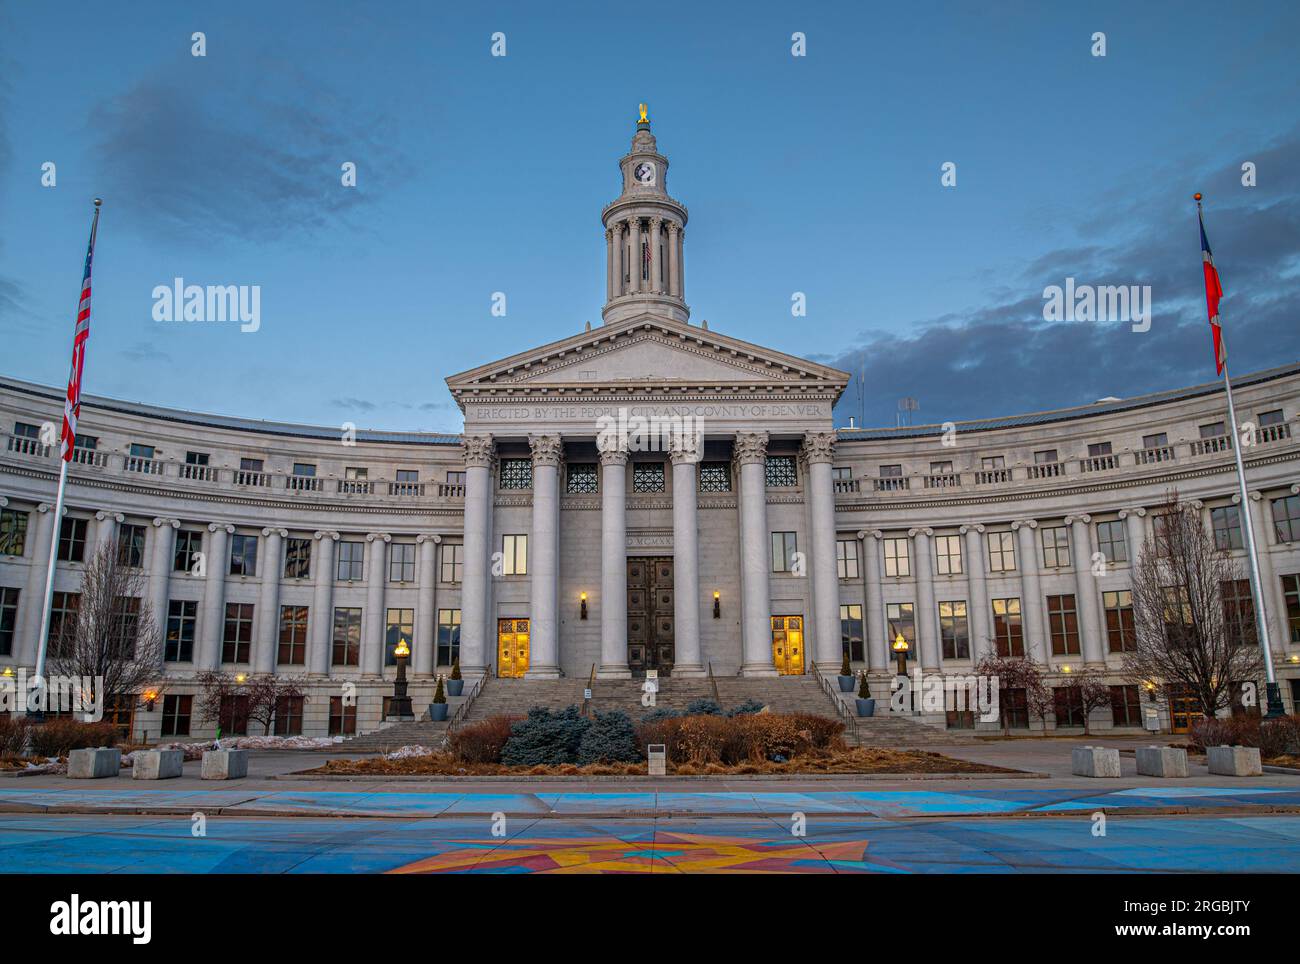 Beautiful shot of the City Courthouse in downtown Denver before the sun comes up and with some beautiful clouds in the sky. Stock Photo